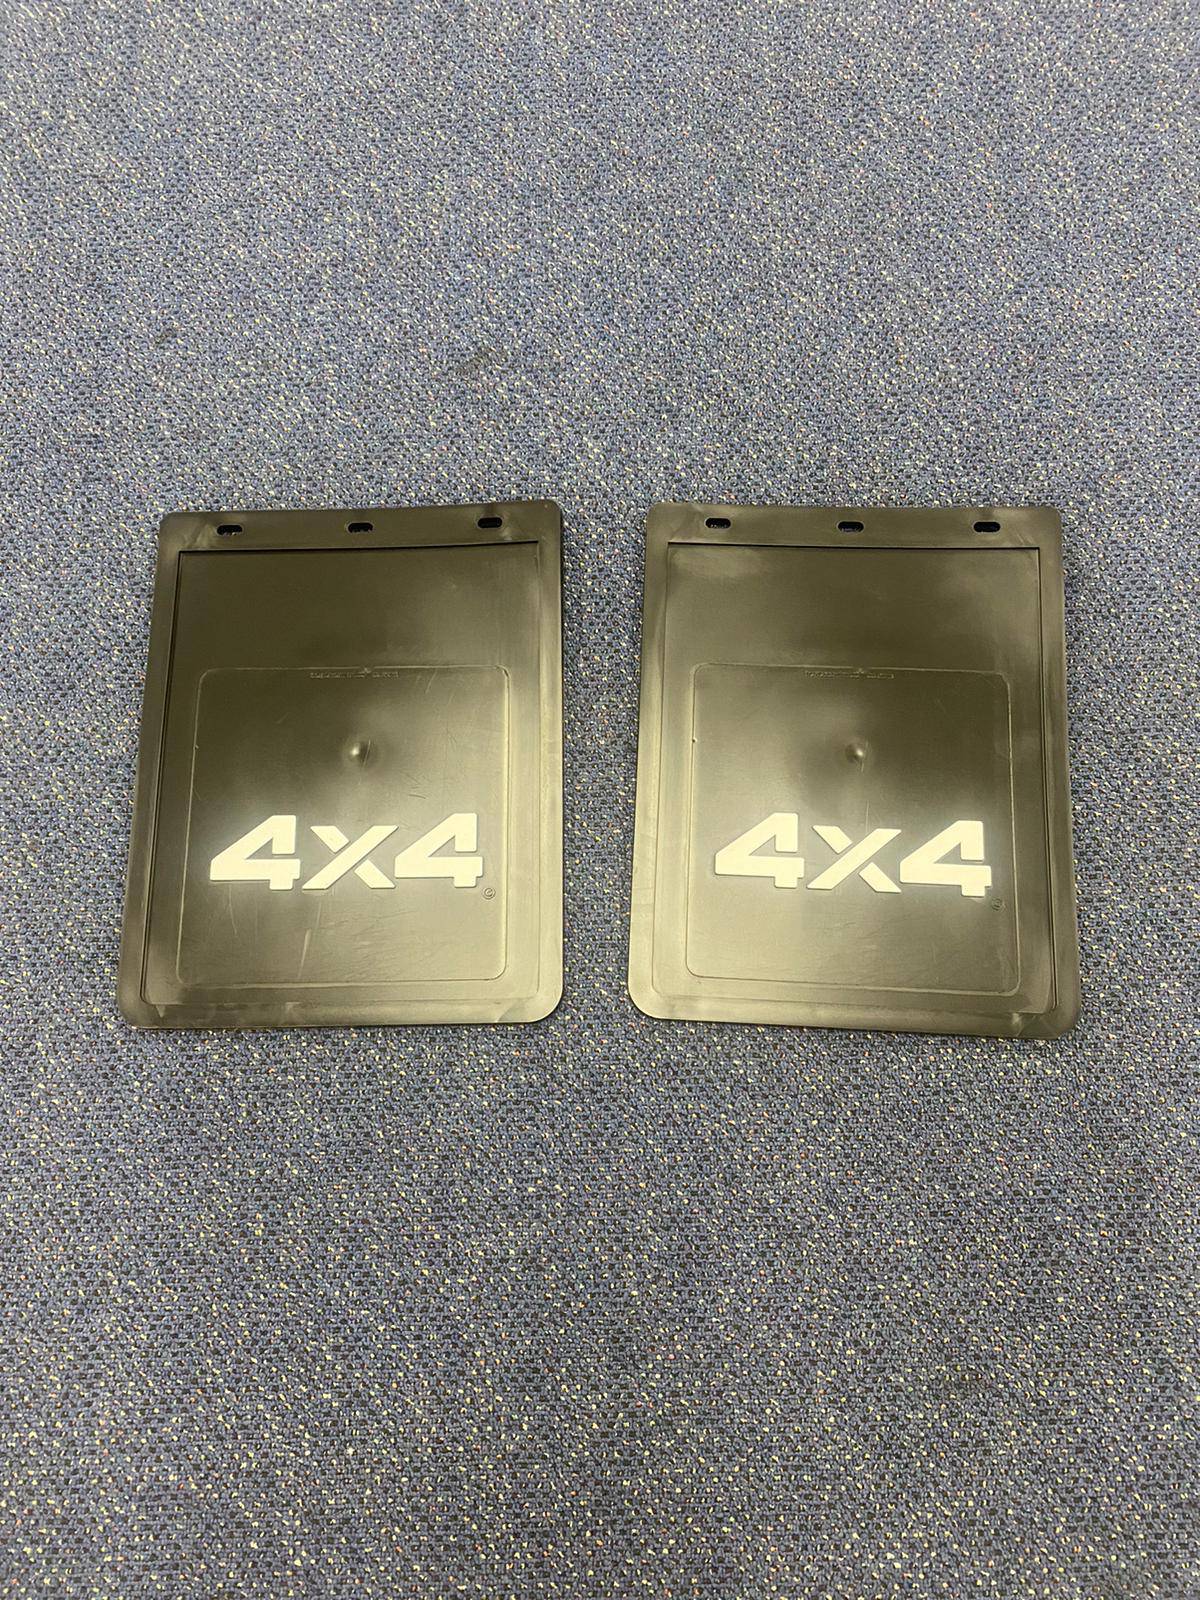 4X4 Mud Flaps Universal Fit All Trays